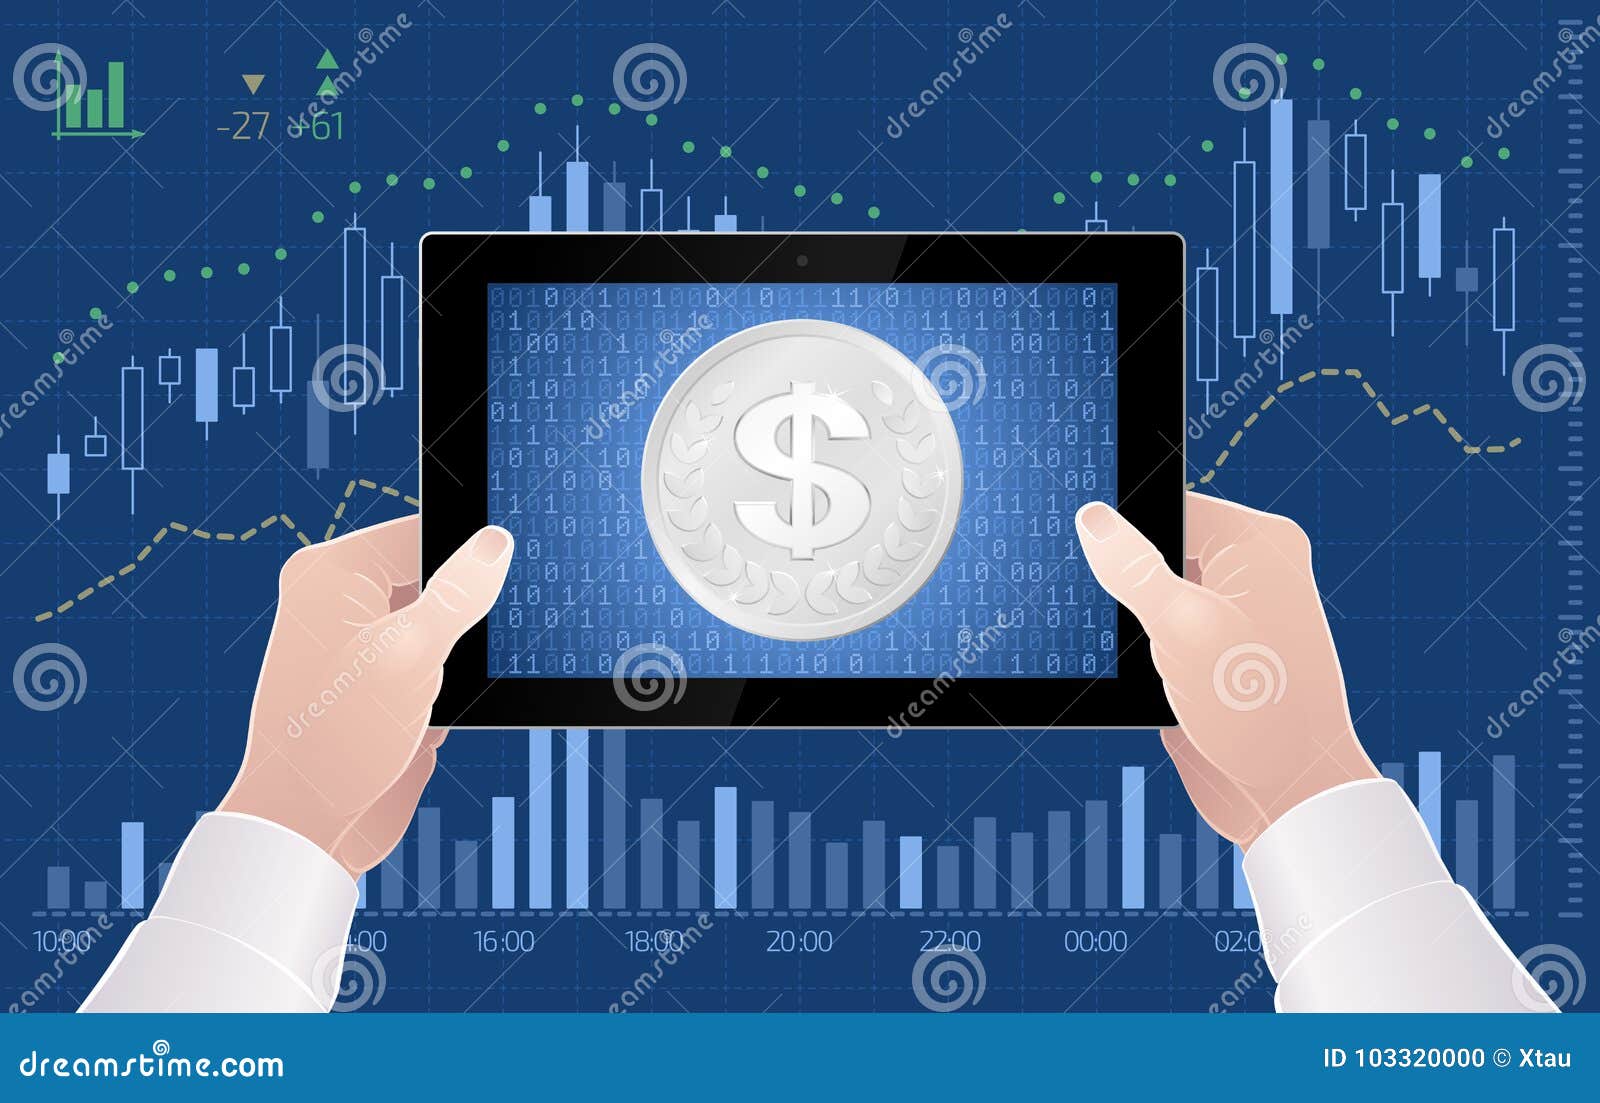 Illustration of online trading of dollar currency on the stock exchange